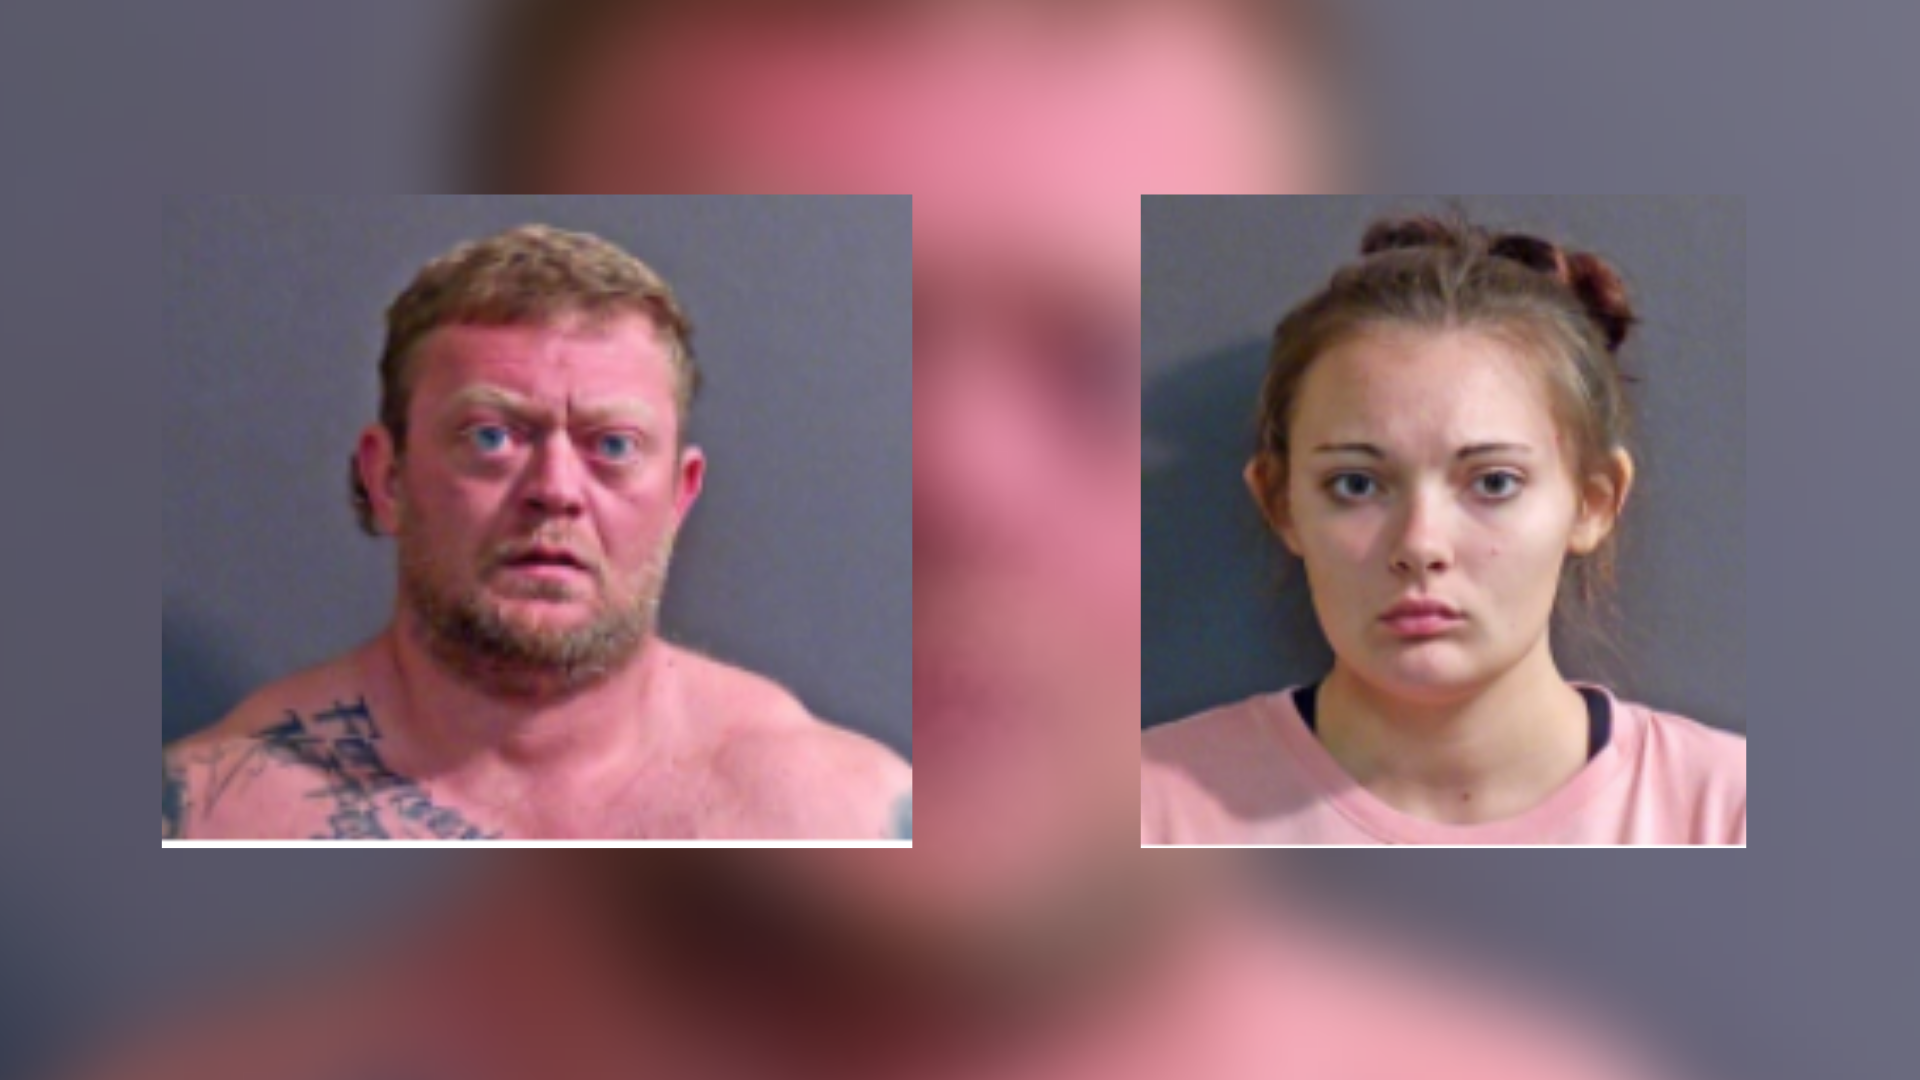 Two arrested in connection to Arkansas teens kidnapping, officials say News fox13memphis